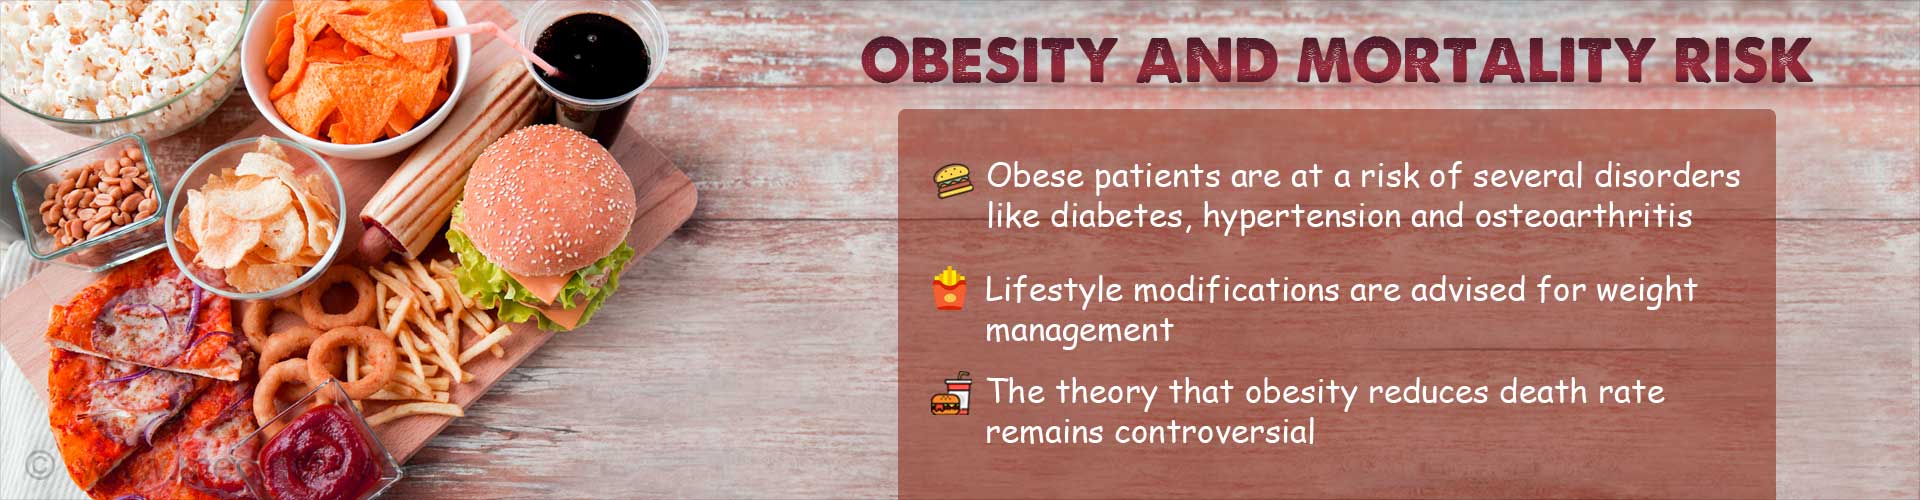 Obesity and Mortality Risk
- Obese patients are at a risk of several disorders like diabetes, hypertension and osteo-arthritis
- Lifestyle modifications are advised for weight management
- The theory that obesity reduces death rate remains controversial